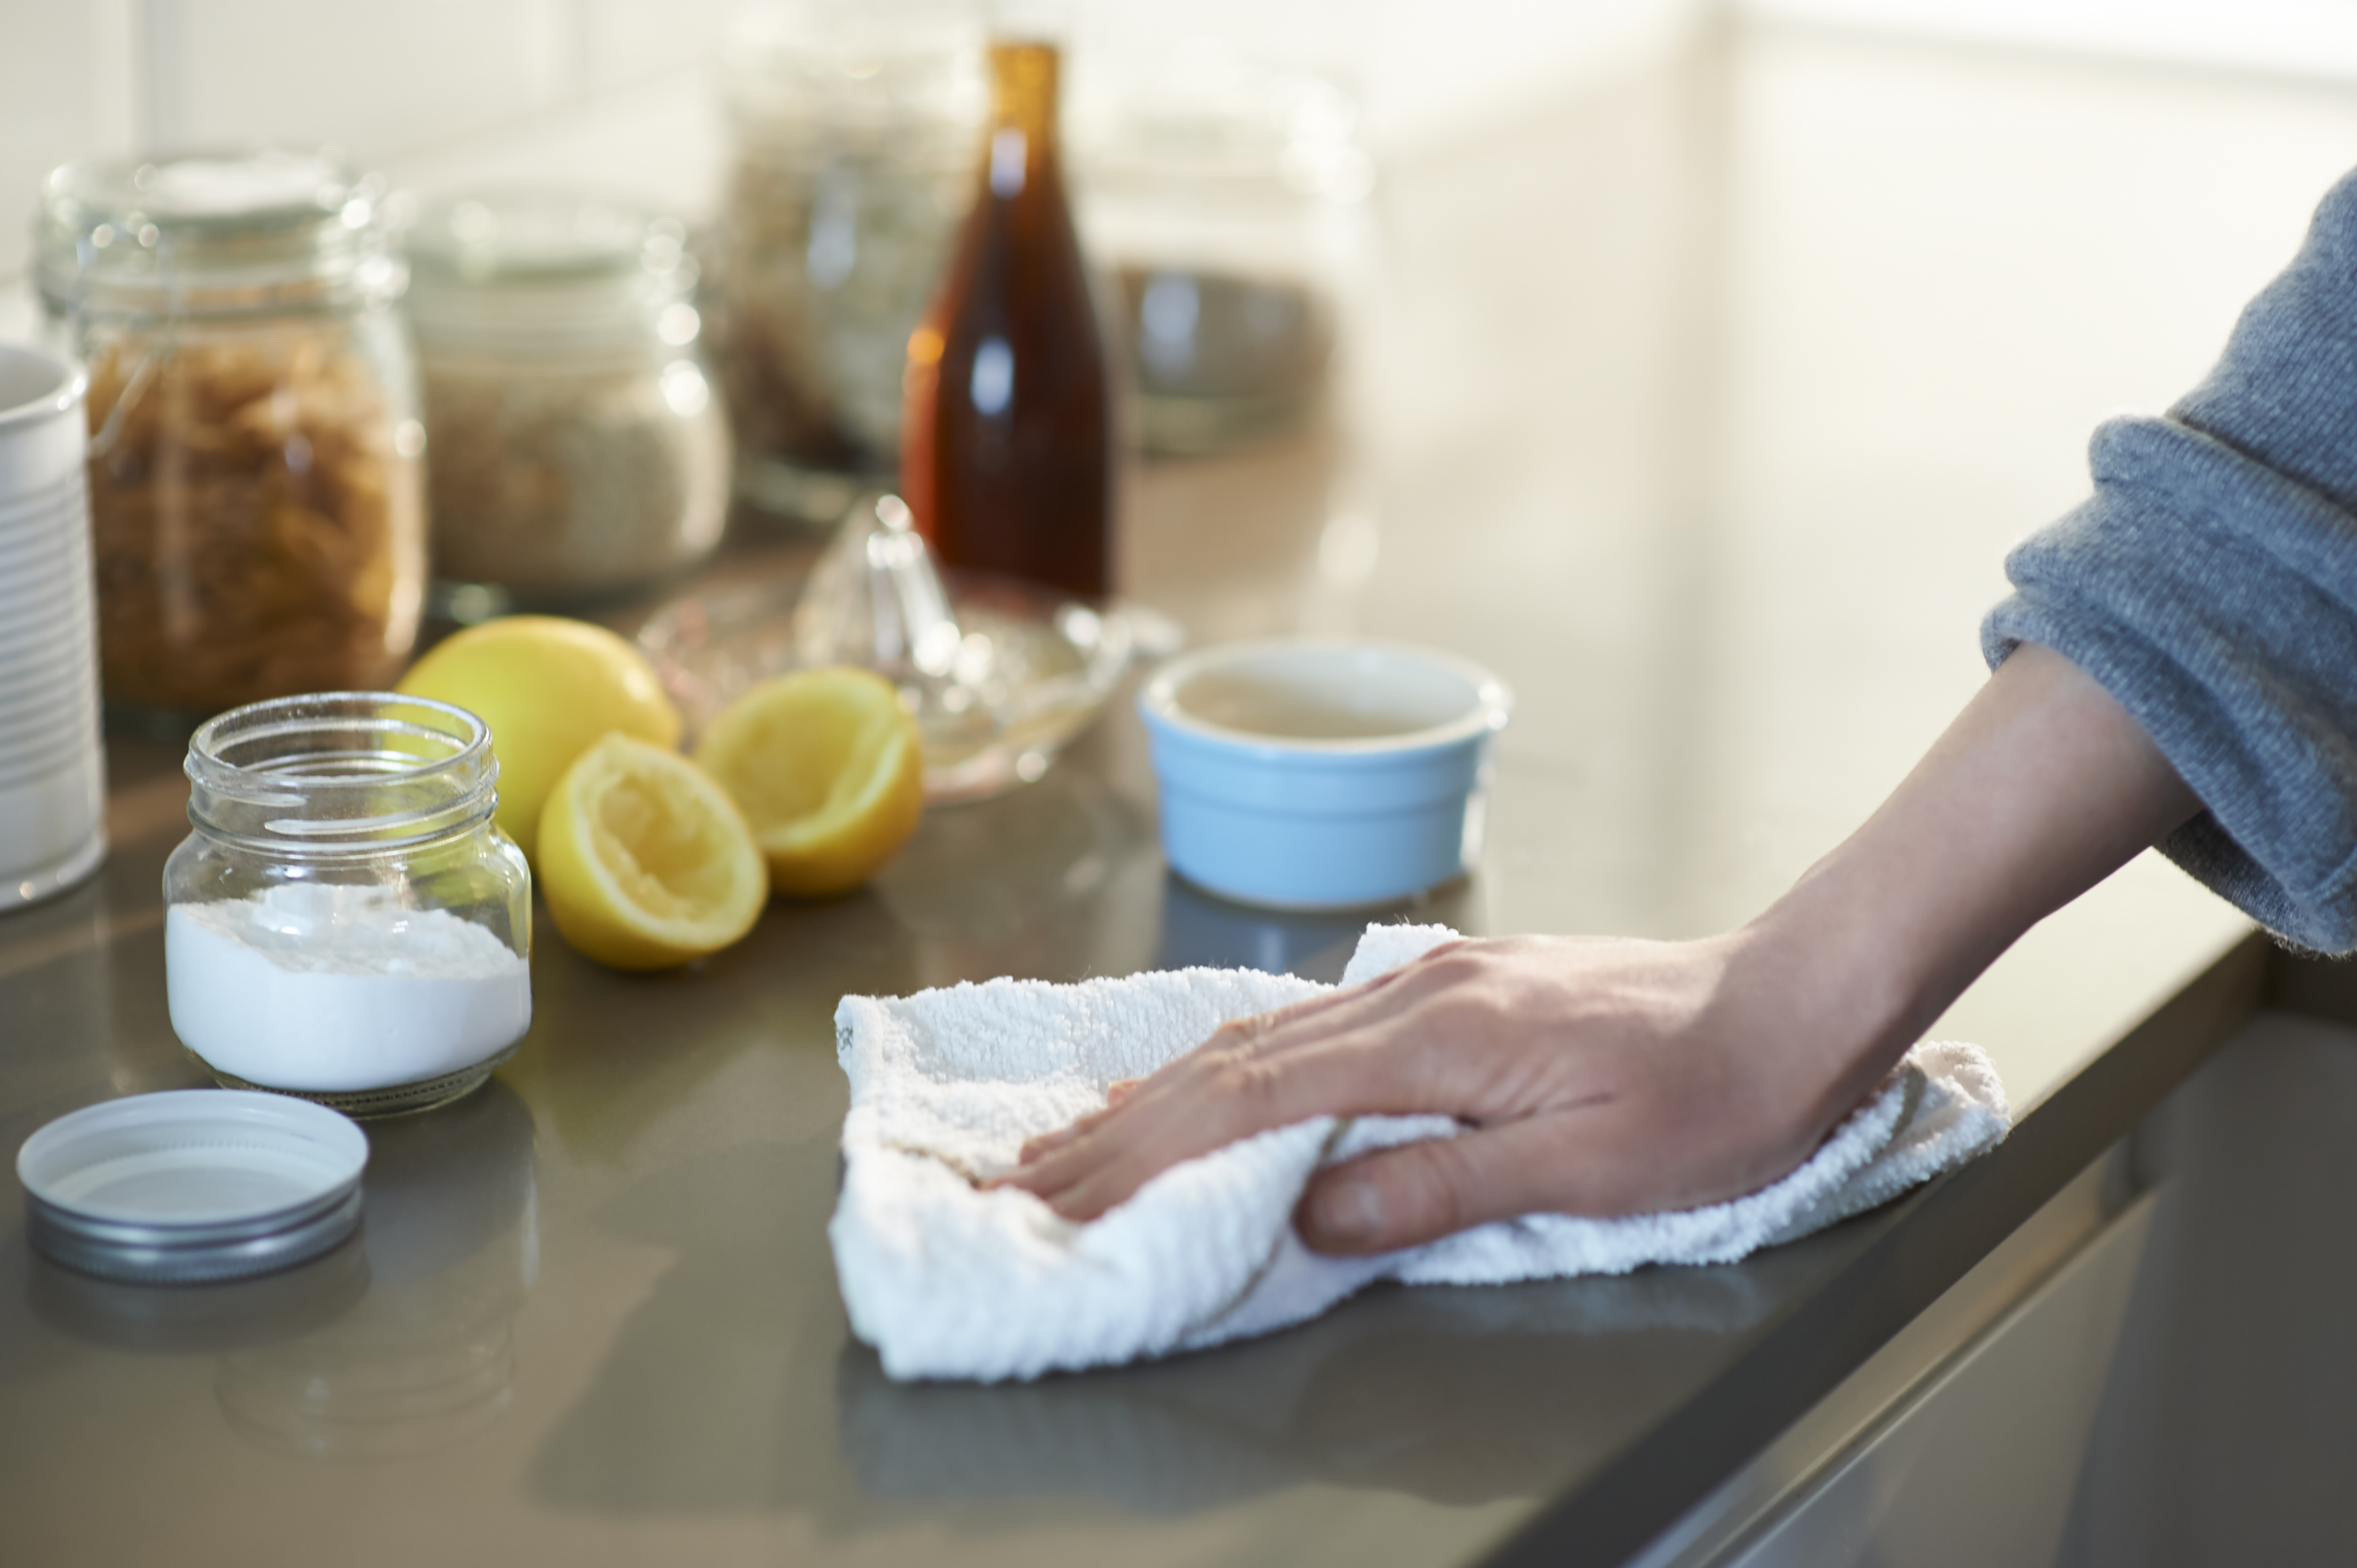 Warning: Are Homemade Vinegar Cleaners Safe for All Surfaces?